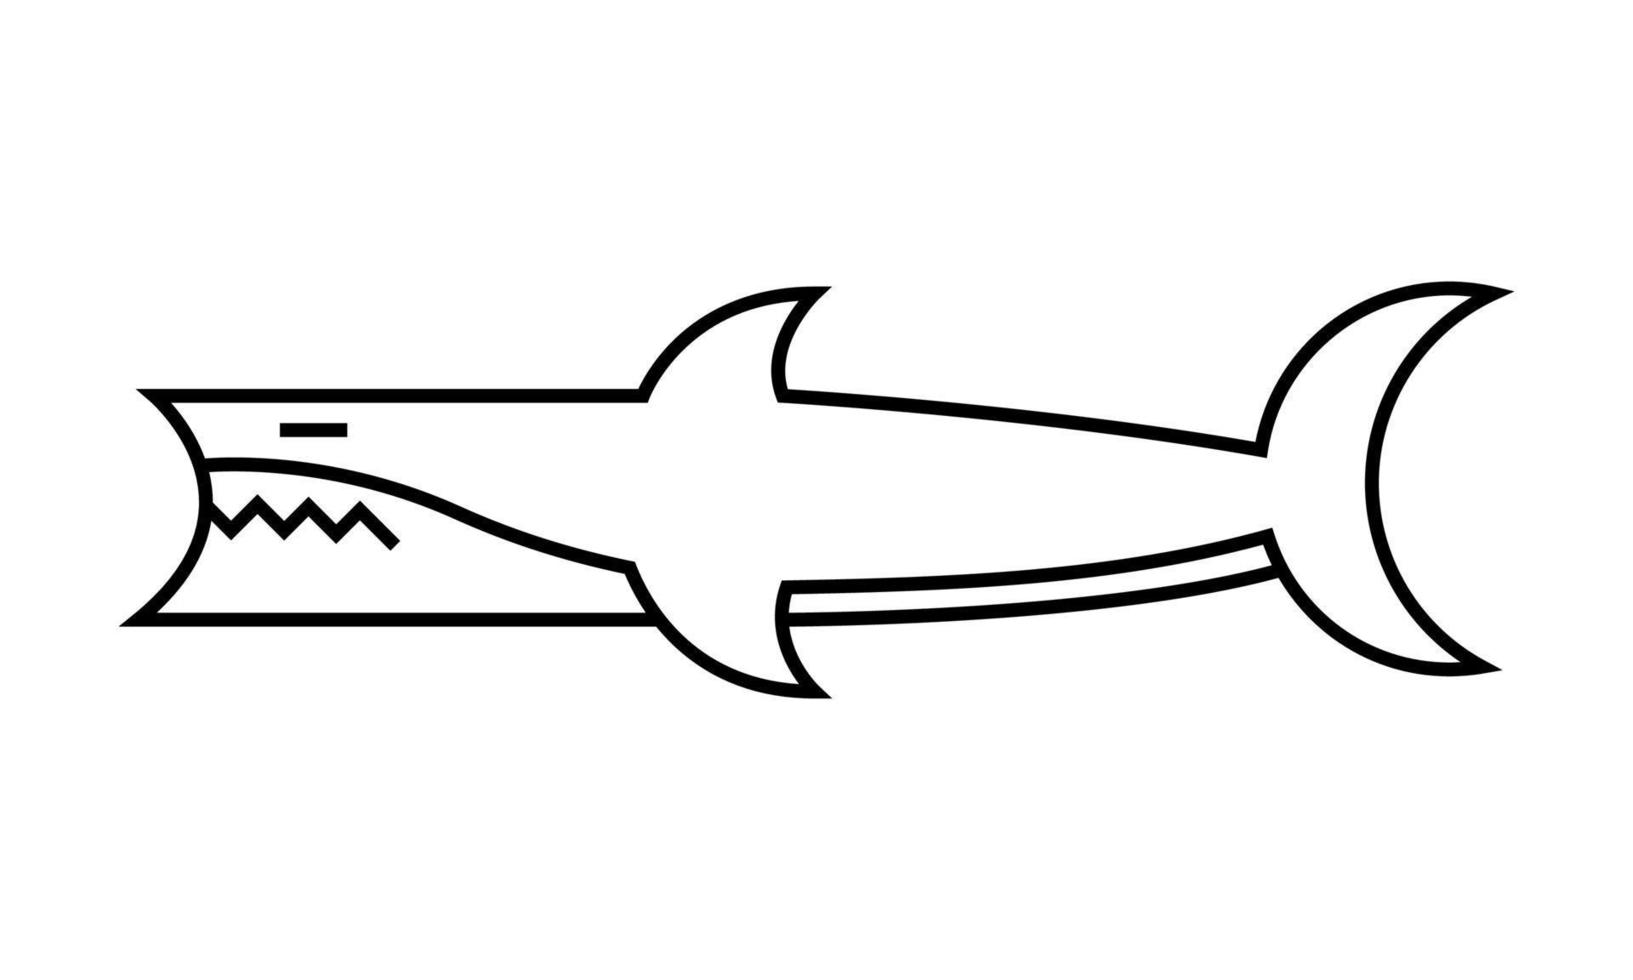 Shark icon in line-art style for printing and design. Vector illustration.